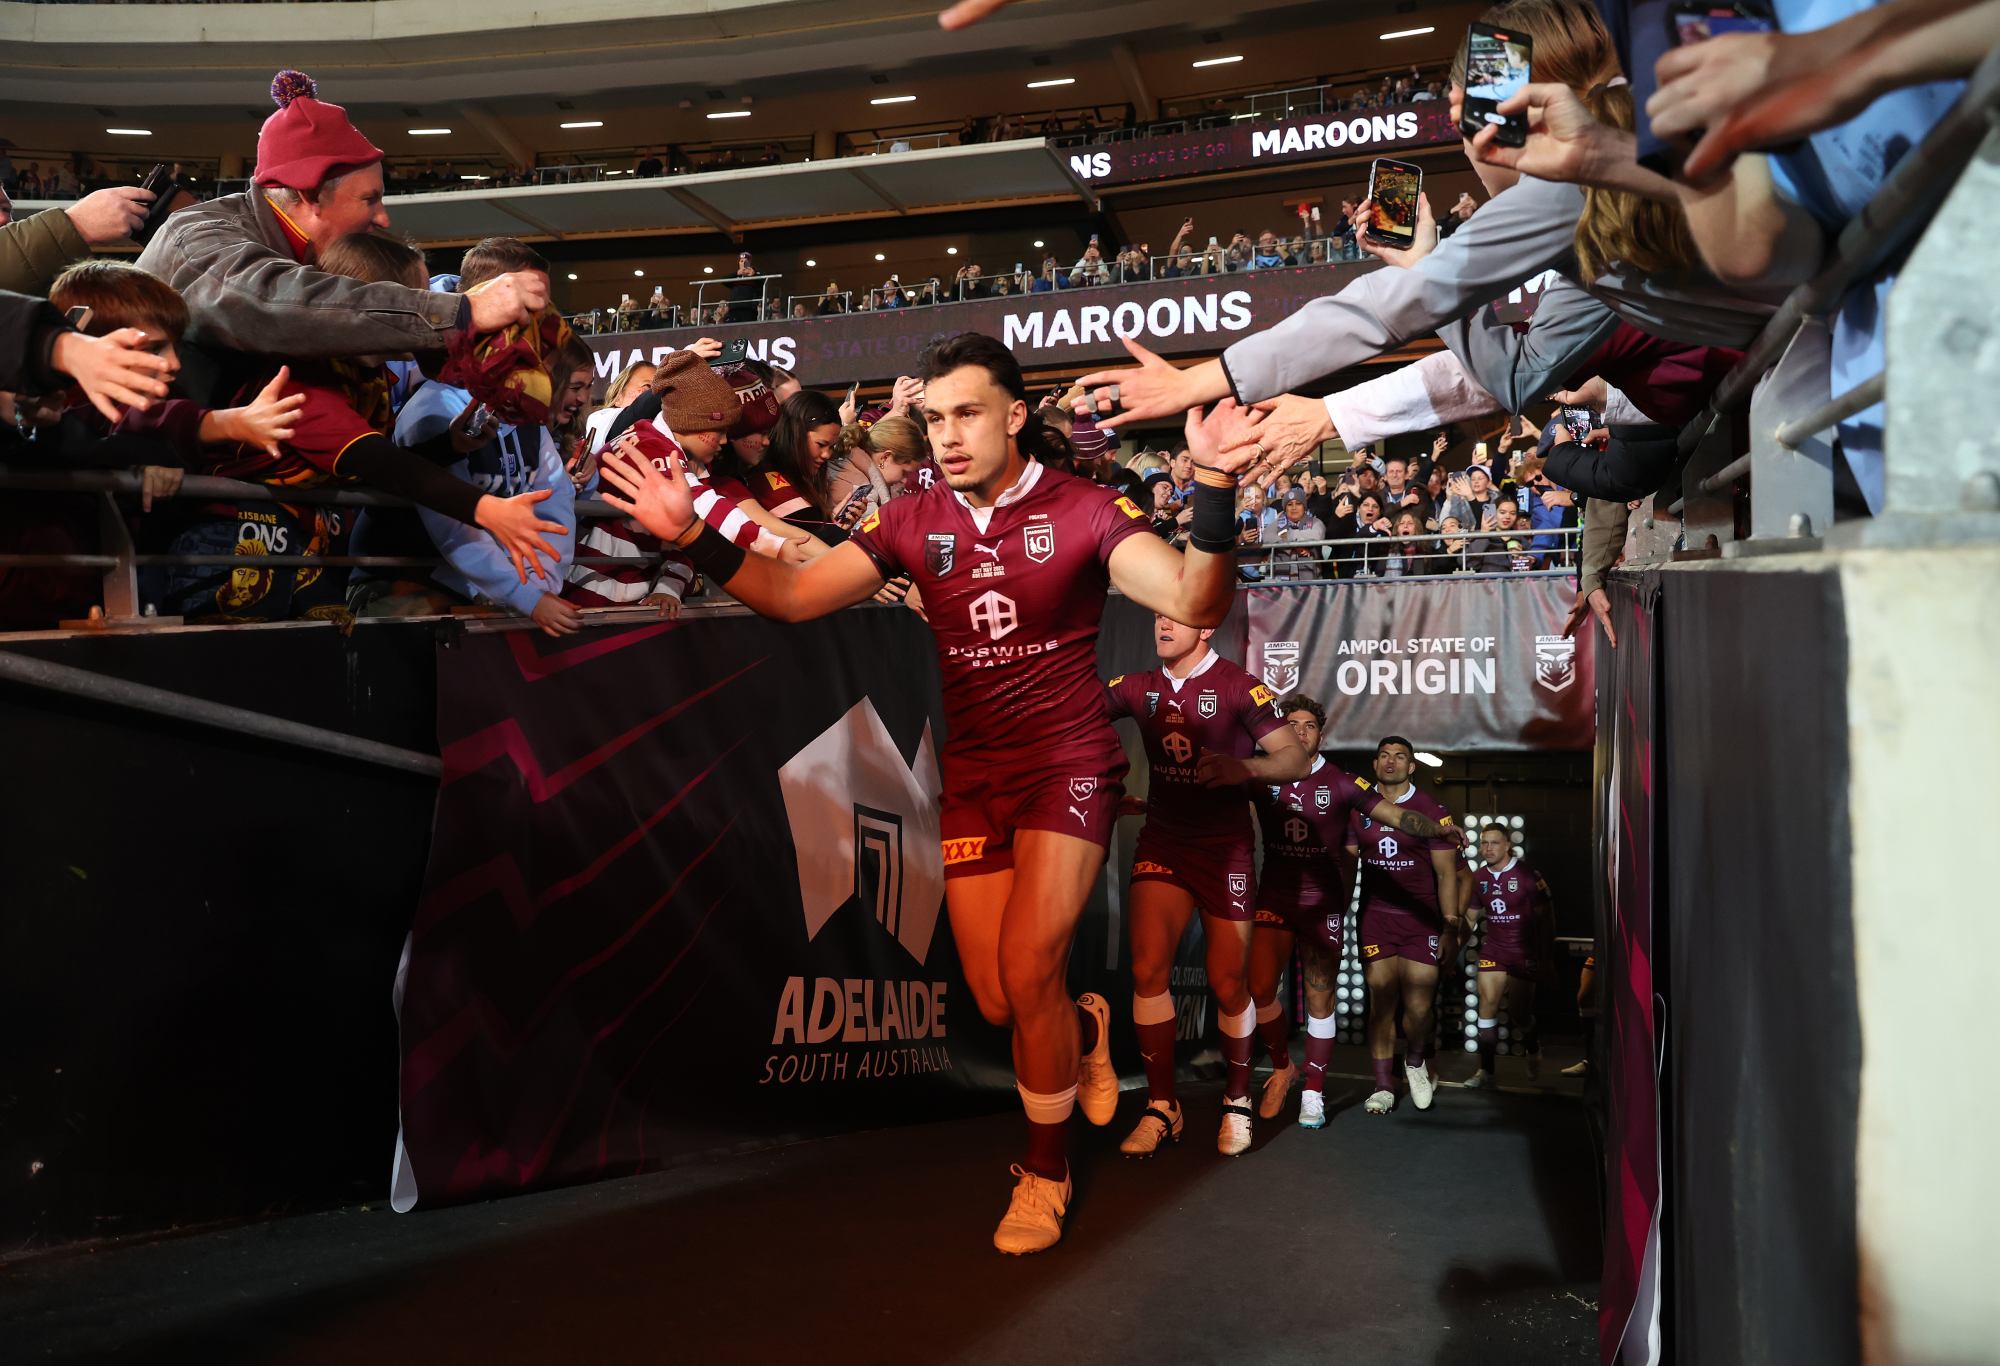 ADELAIDE, AUSTRALIA - MAY 31: Tino Fa'asuamaleaui of the Maroons runs onto the field during game one of the 2023 State of Origin series between the Queensland Maroons and New South Wales Blues at Adelaide Oval on May 31, 2023 in Adelaide, Australia. (Photo by Mark Kolbe/Getty Images)